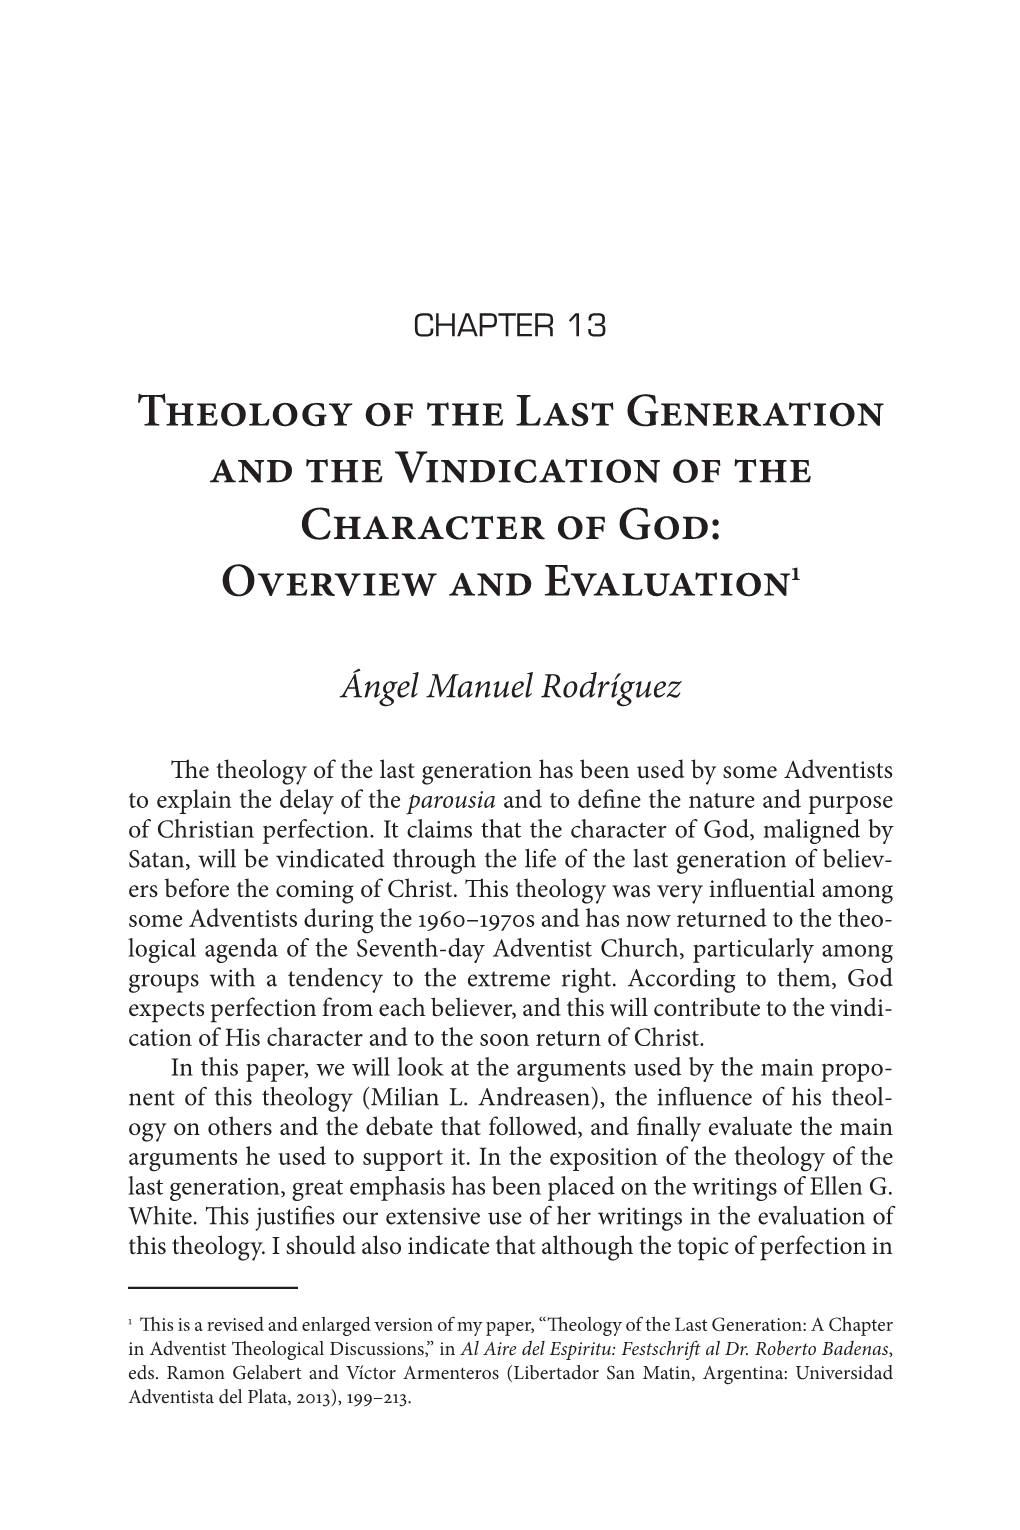 Theology of the Last Generation and the Vindication of the Character of God: Overview and Evaluation1